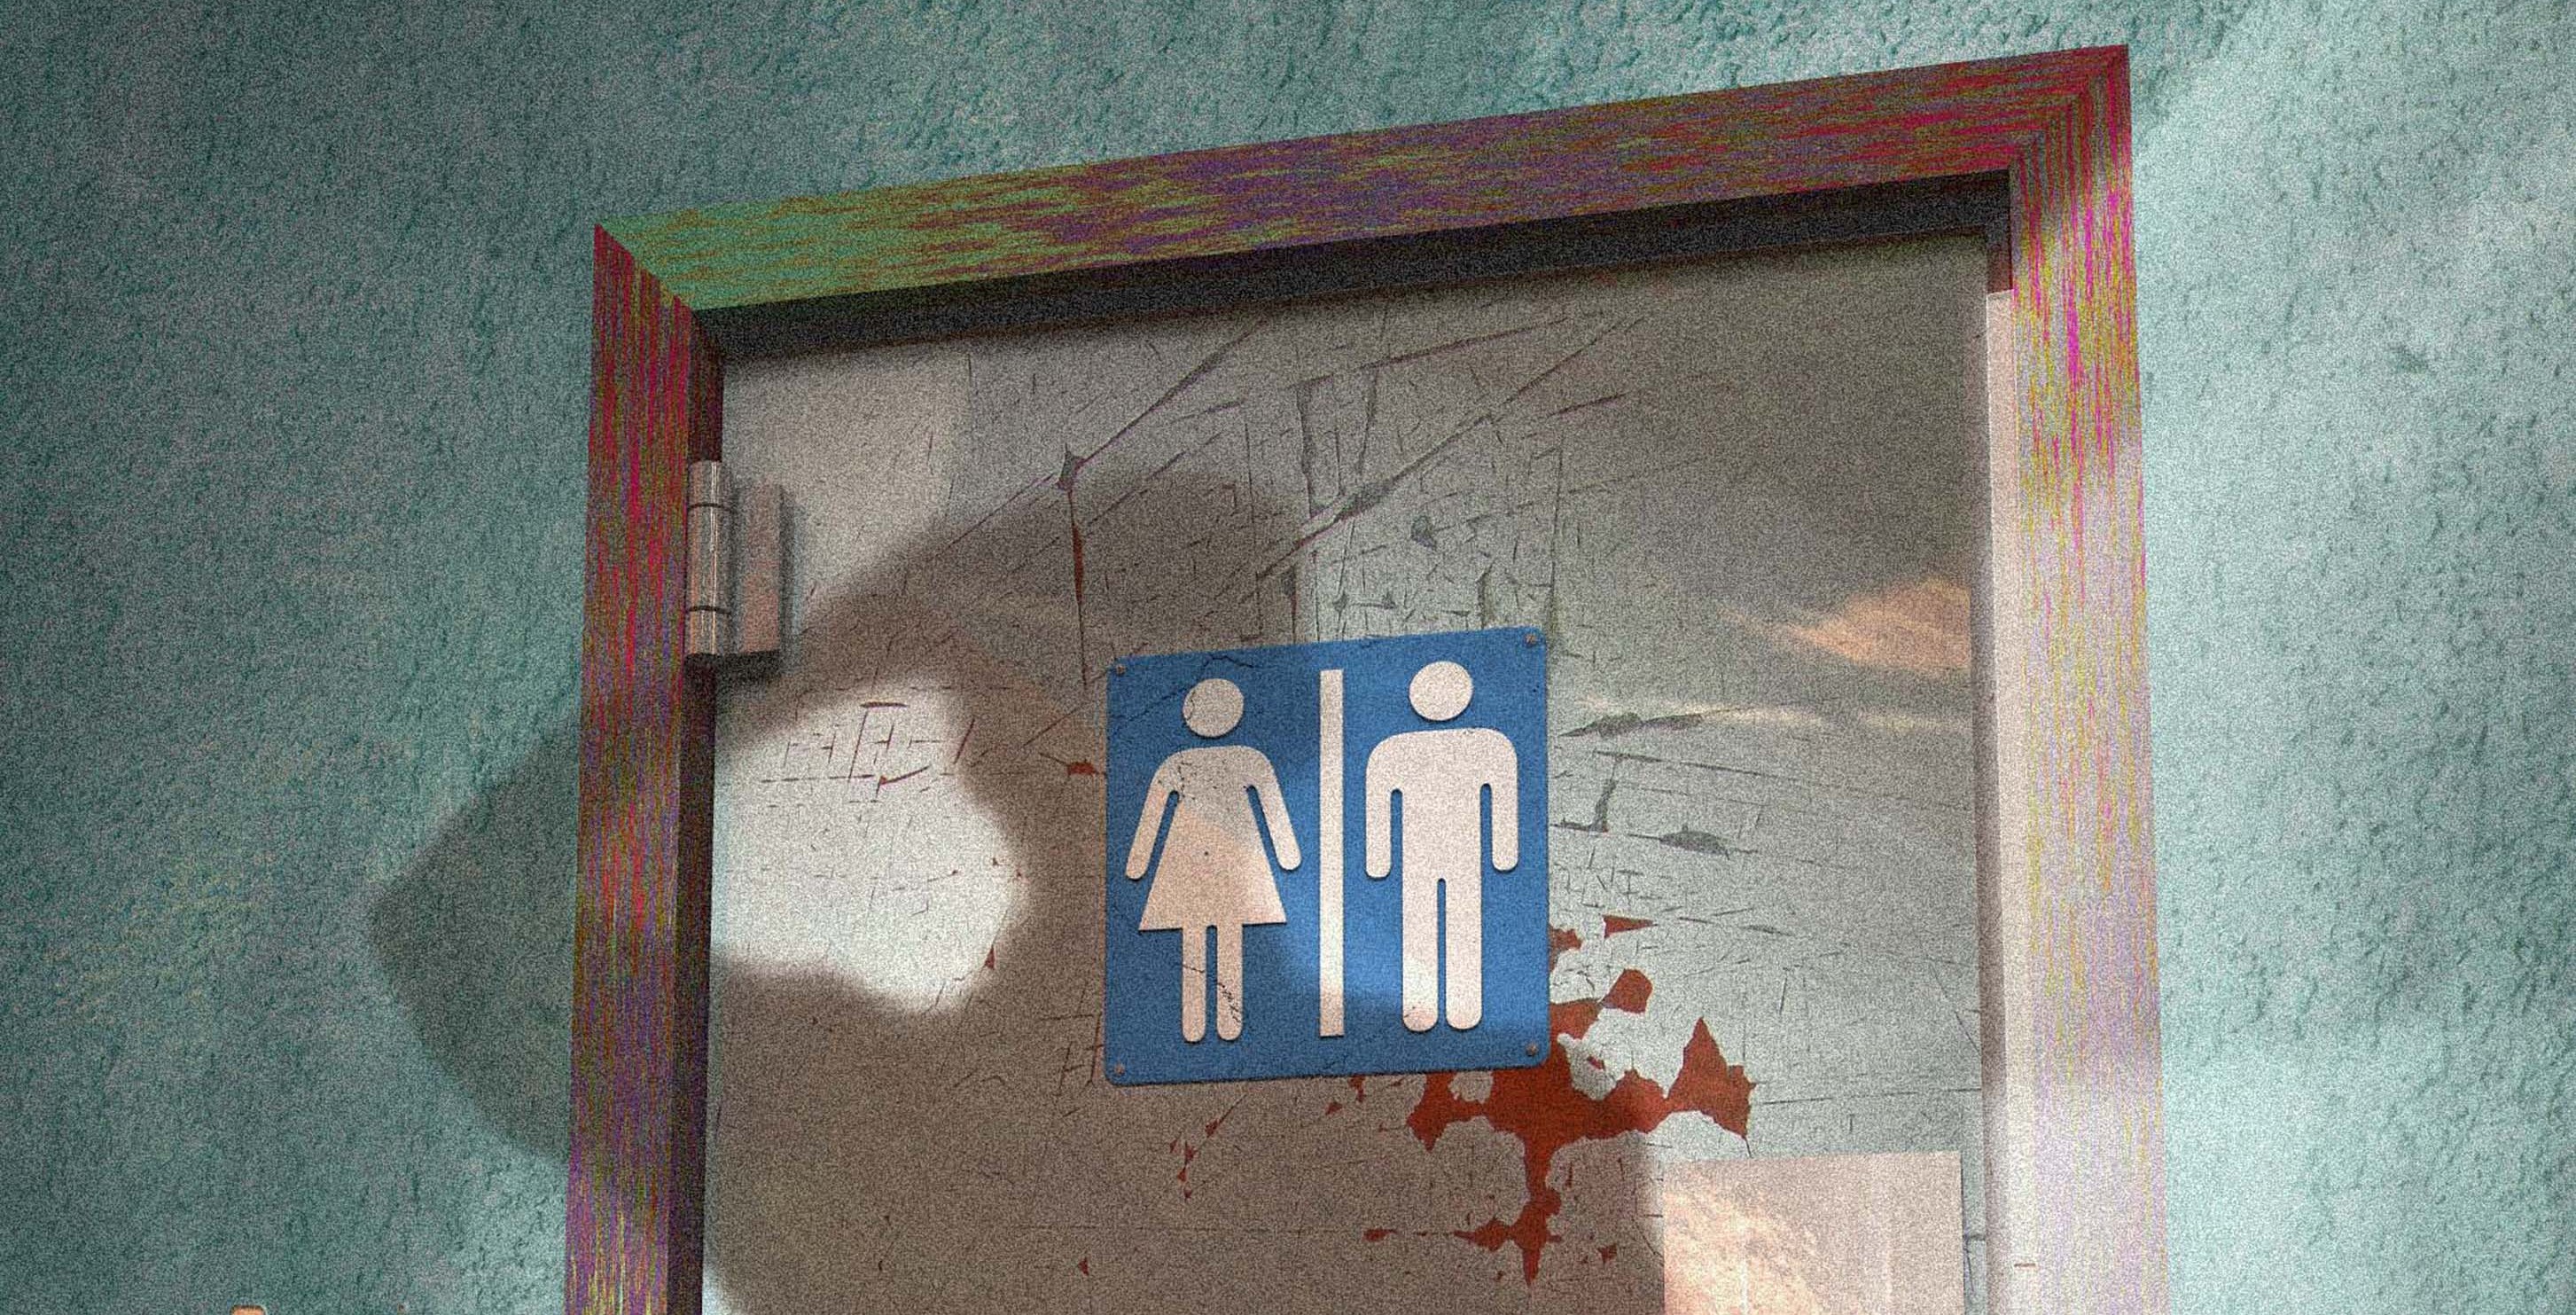 Gender neutral bathrooms: all bodies welcome